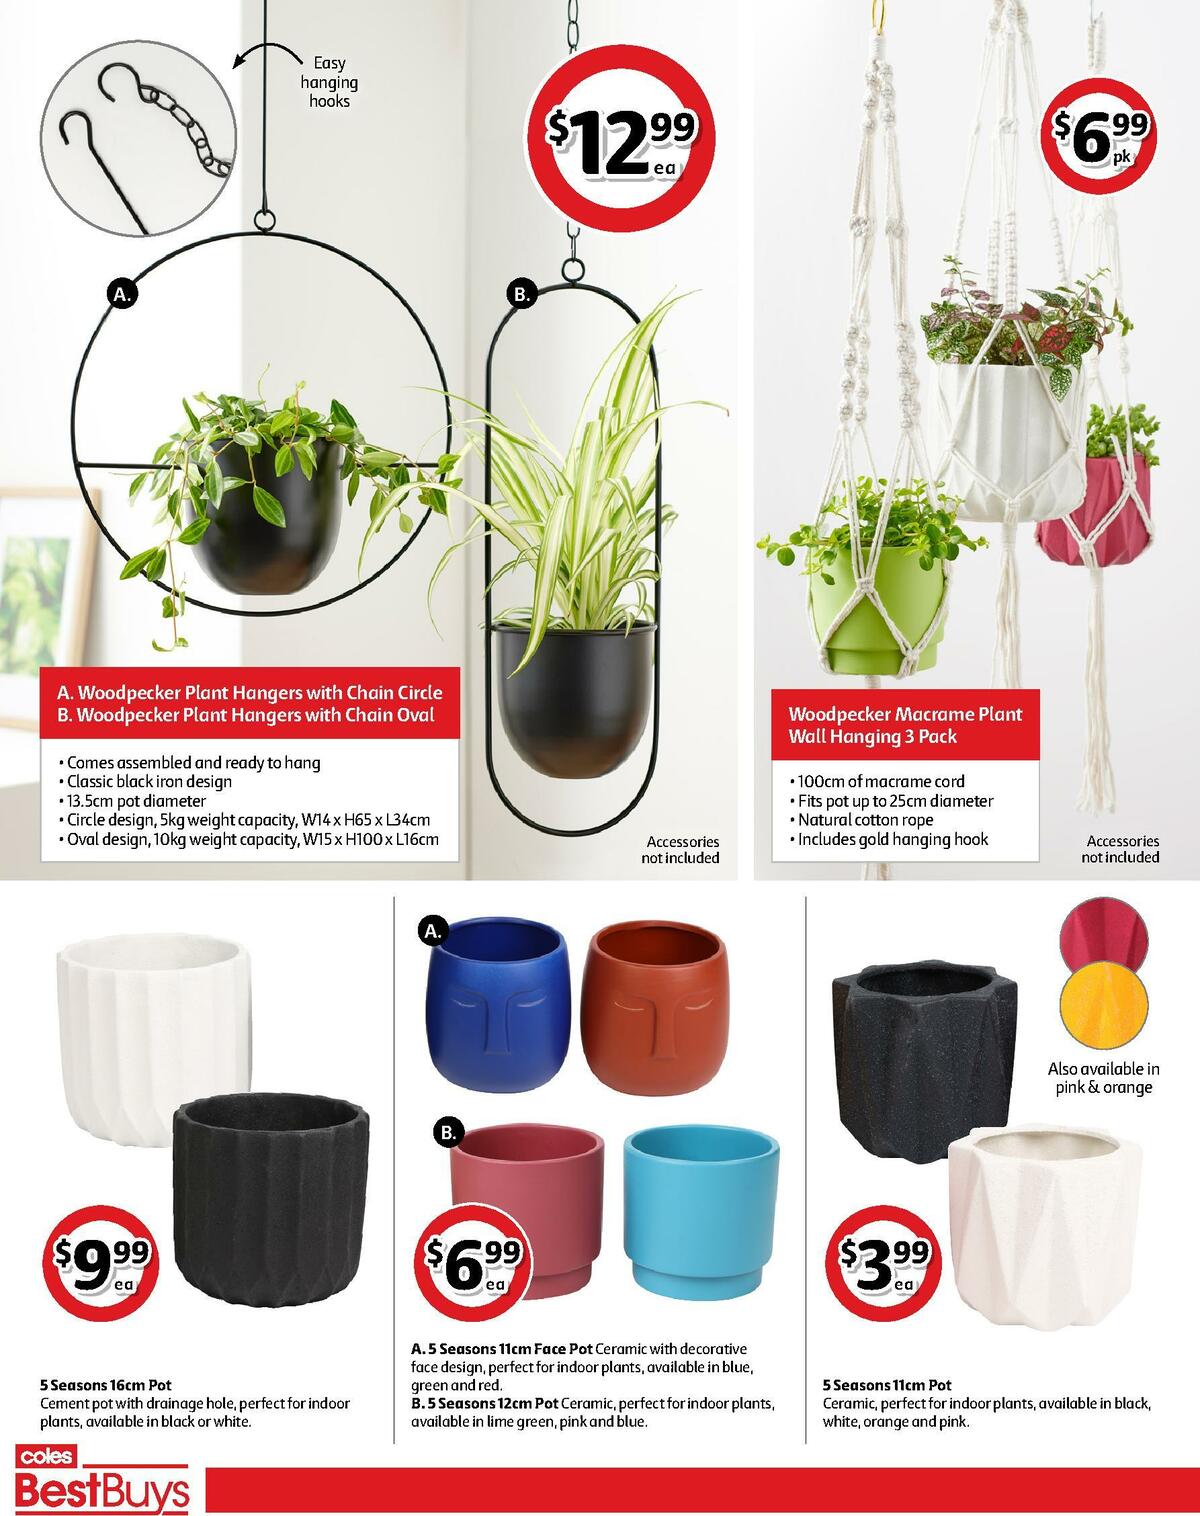 Coles Best Buys - Indoor Jungle & Garden Catalogues from 1 April